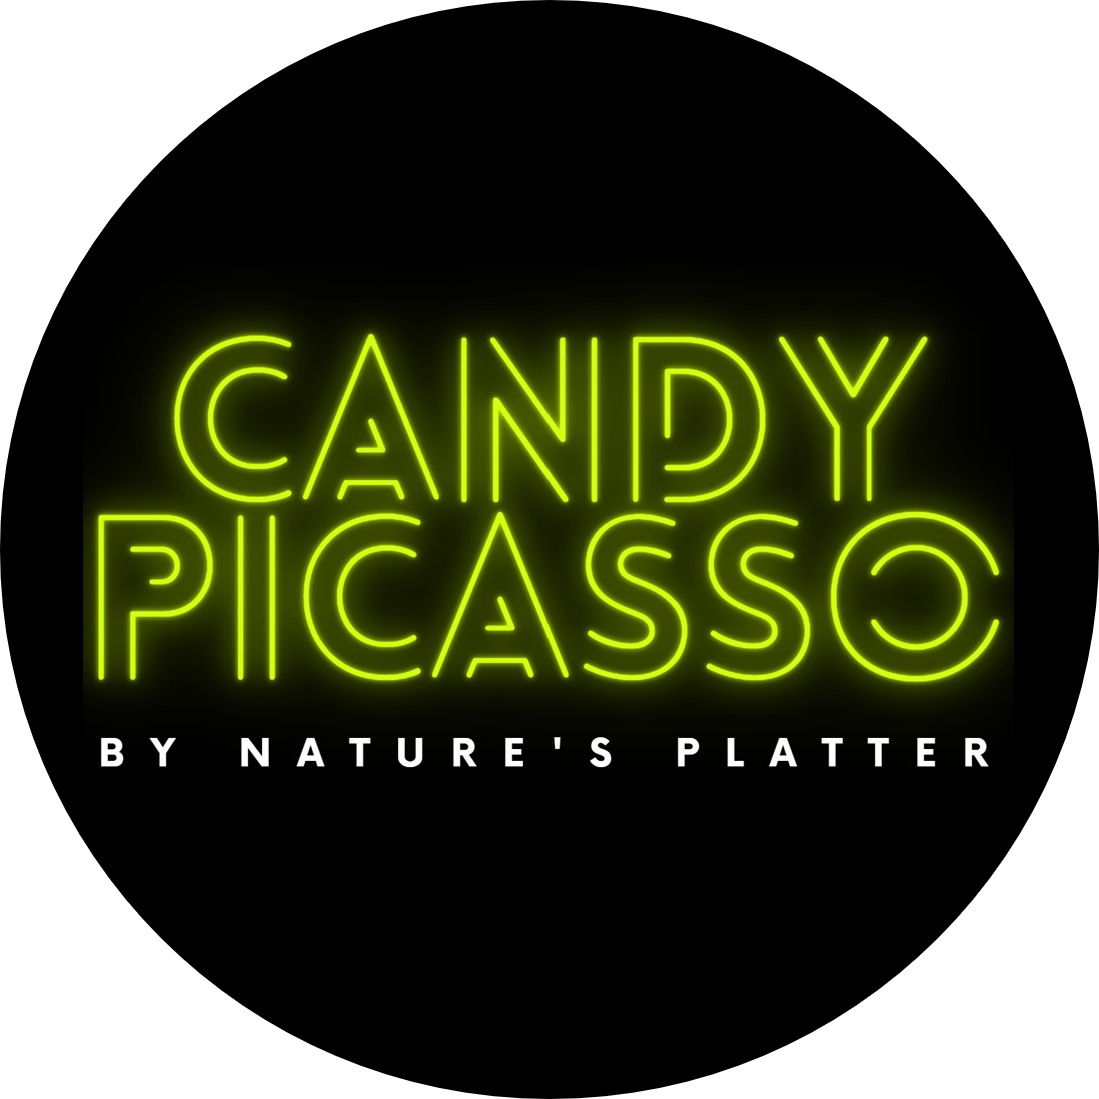 Speaker: Candy Picasso by Nature's Platter